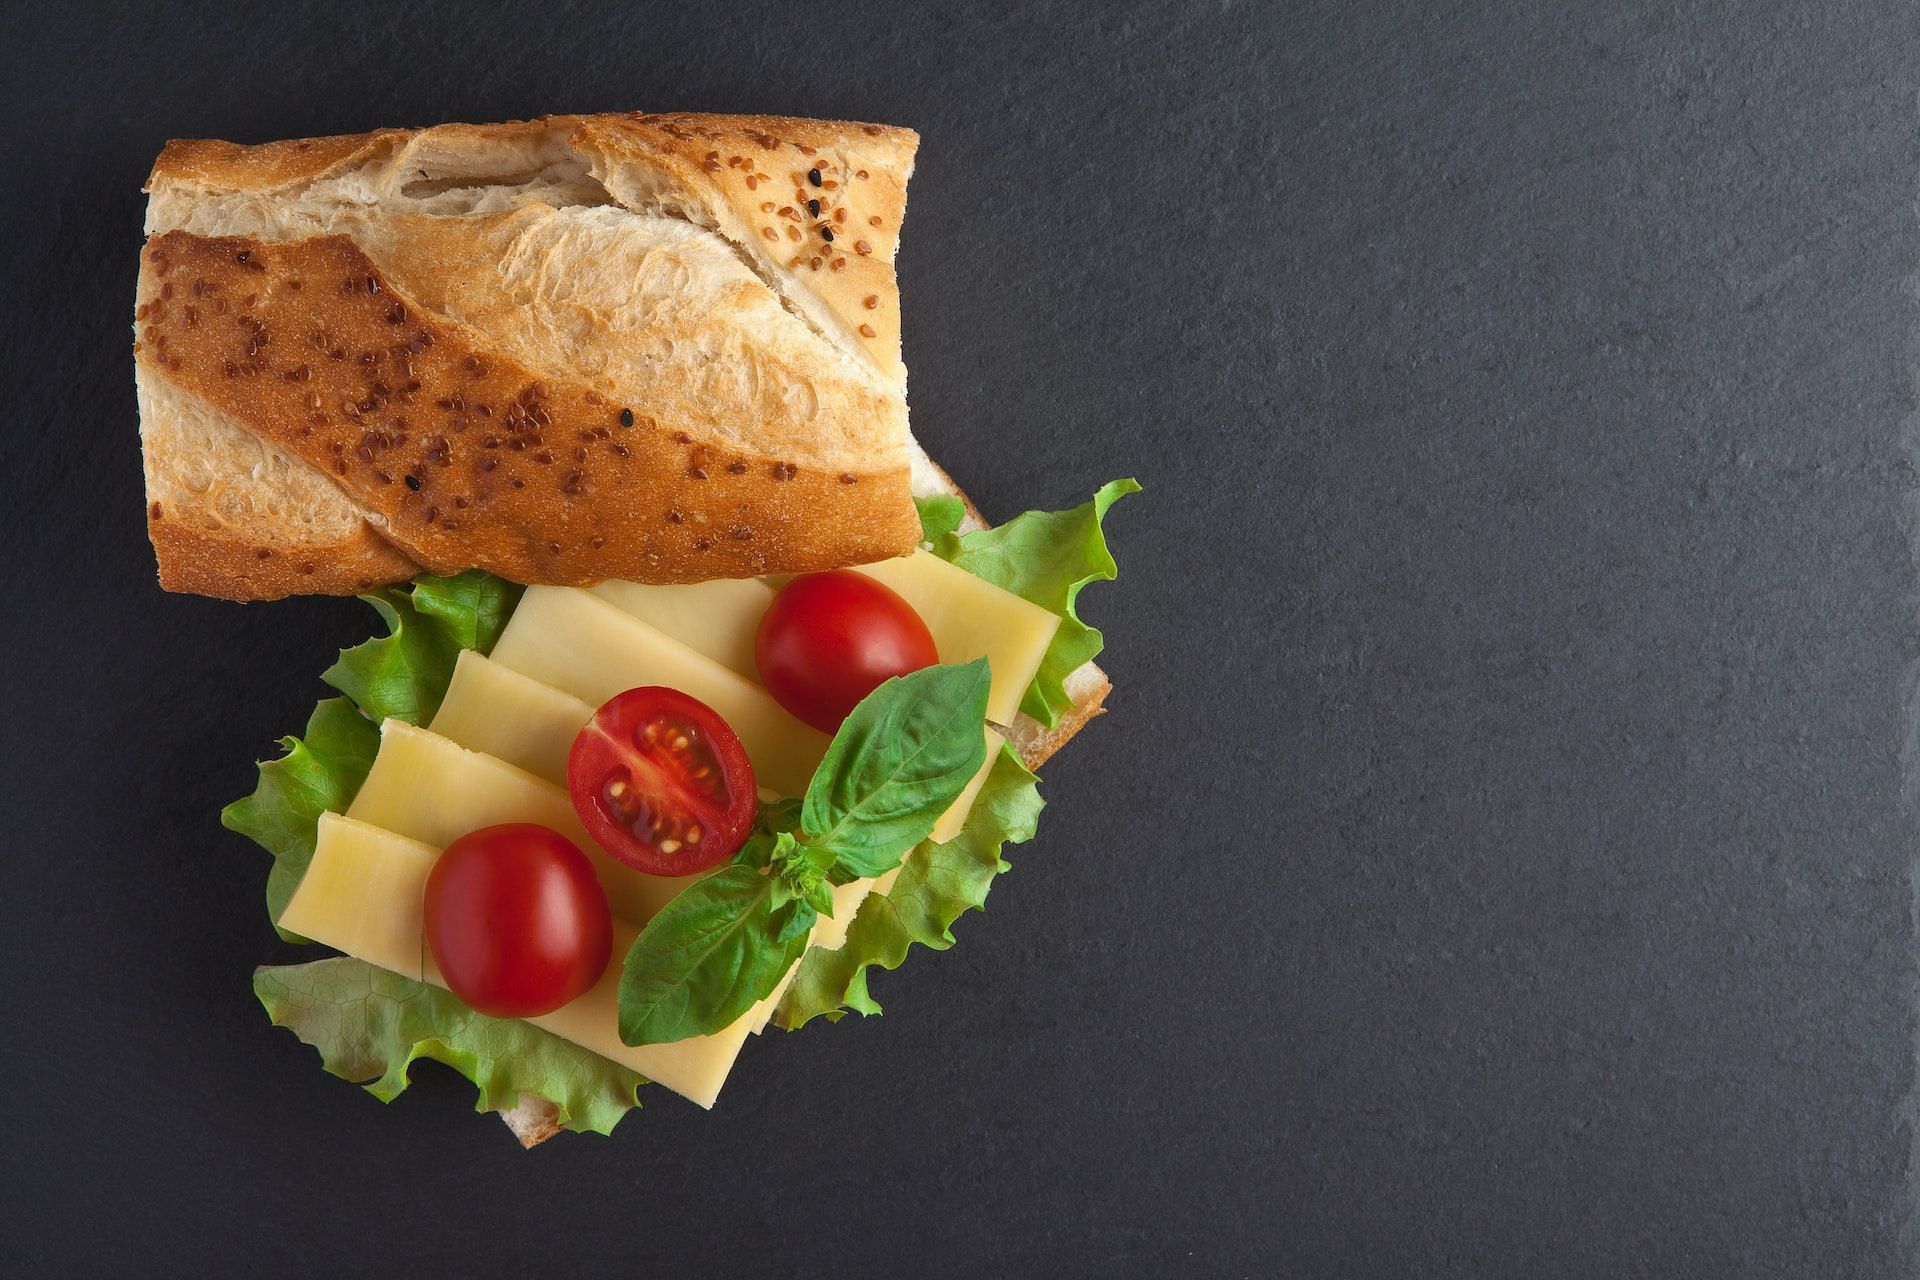 Cheddar cheese is used in sandwiches, pizzas, and burgers. (Photo via Pexels/&Ouml;nder &Ouml;rtel)